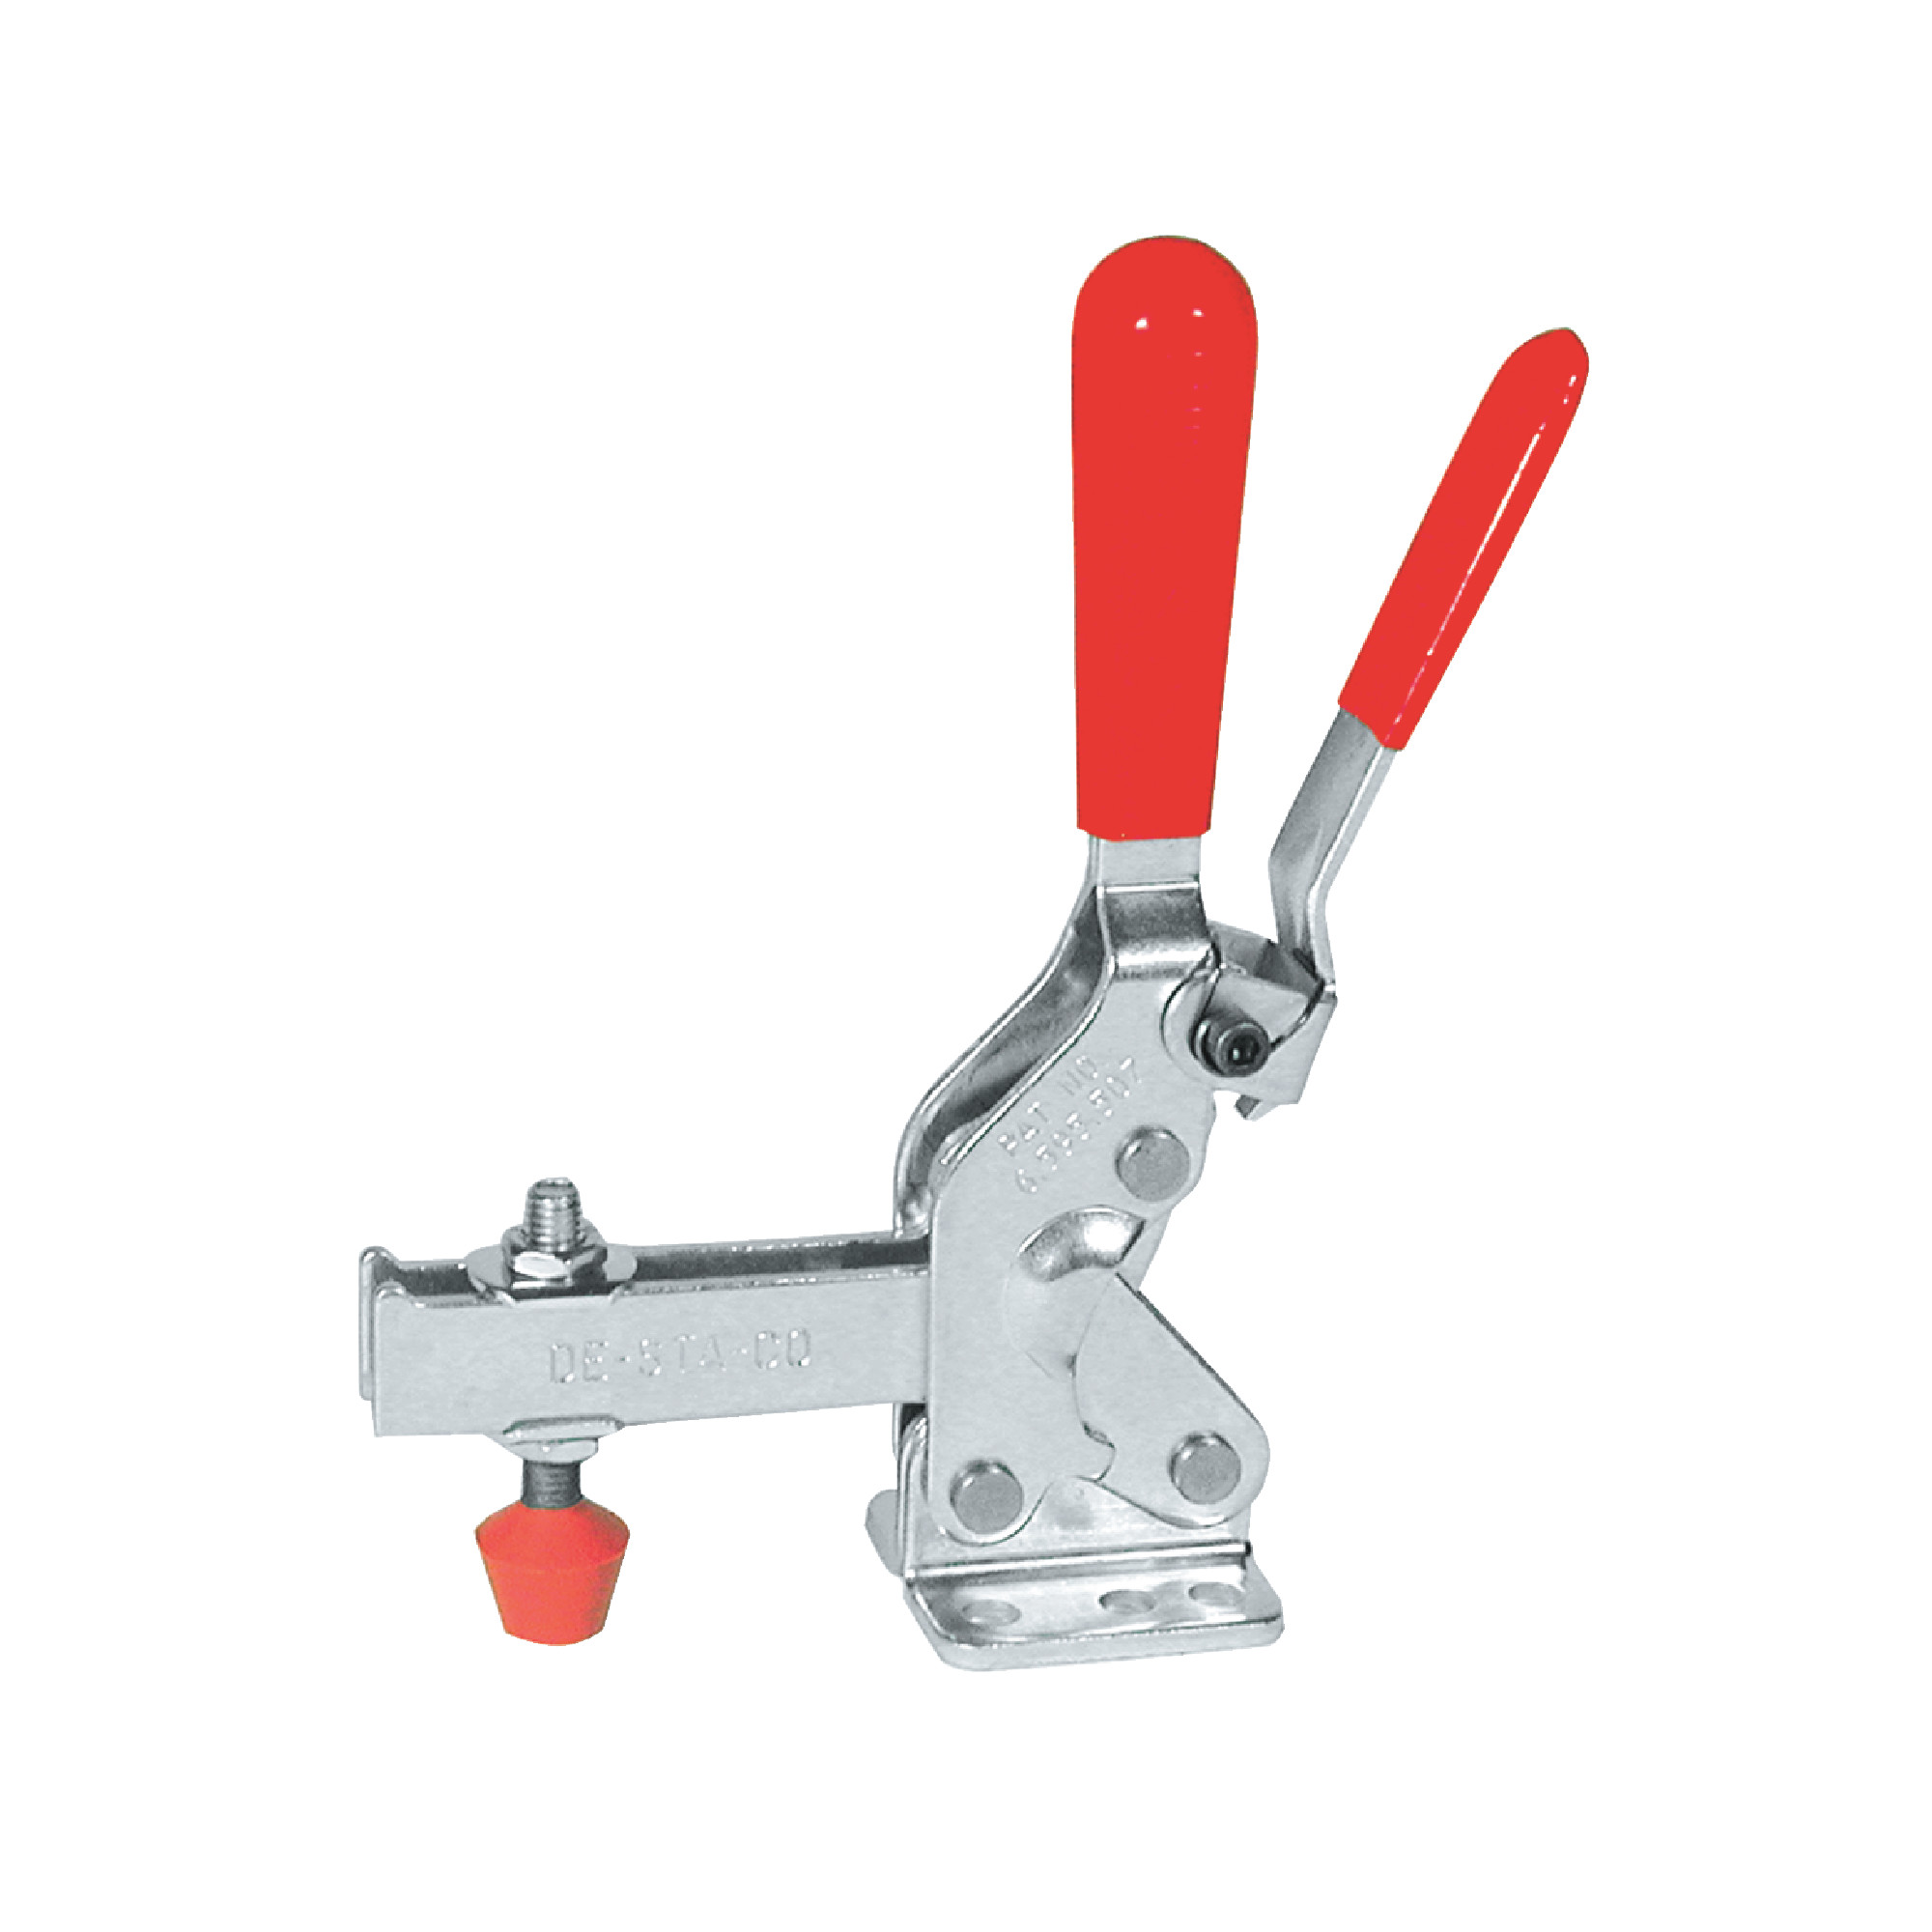 Vertical Hold Down Action Toggle Lock Plus Clamp